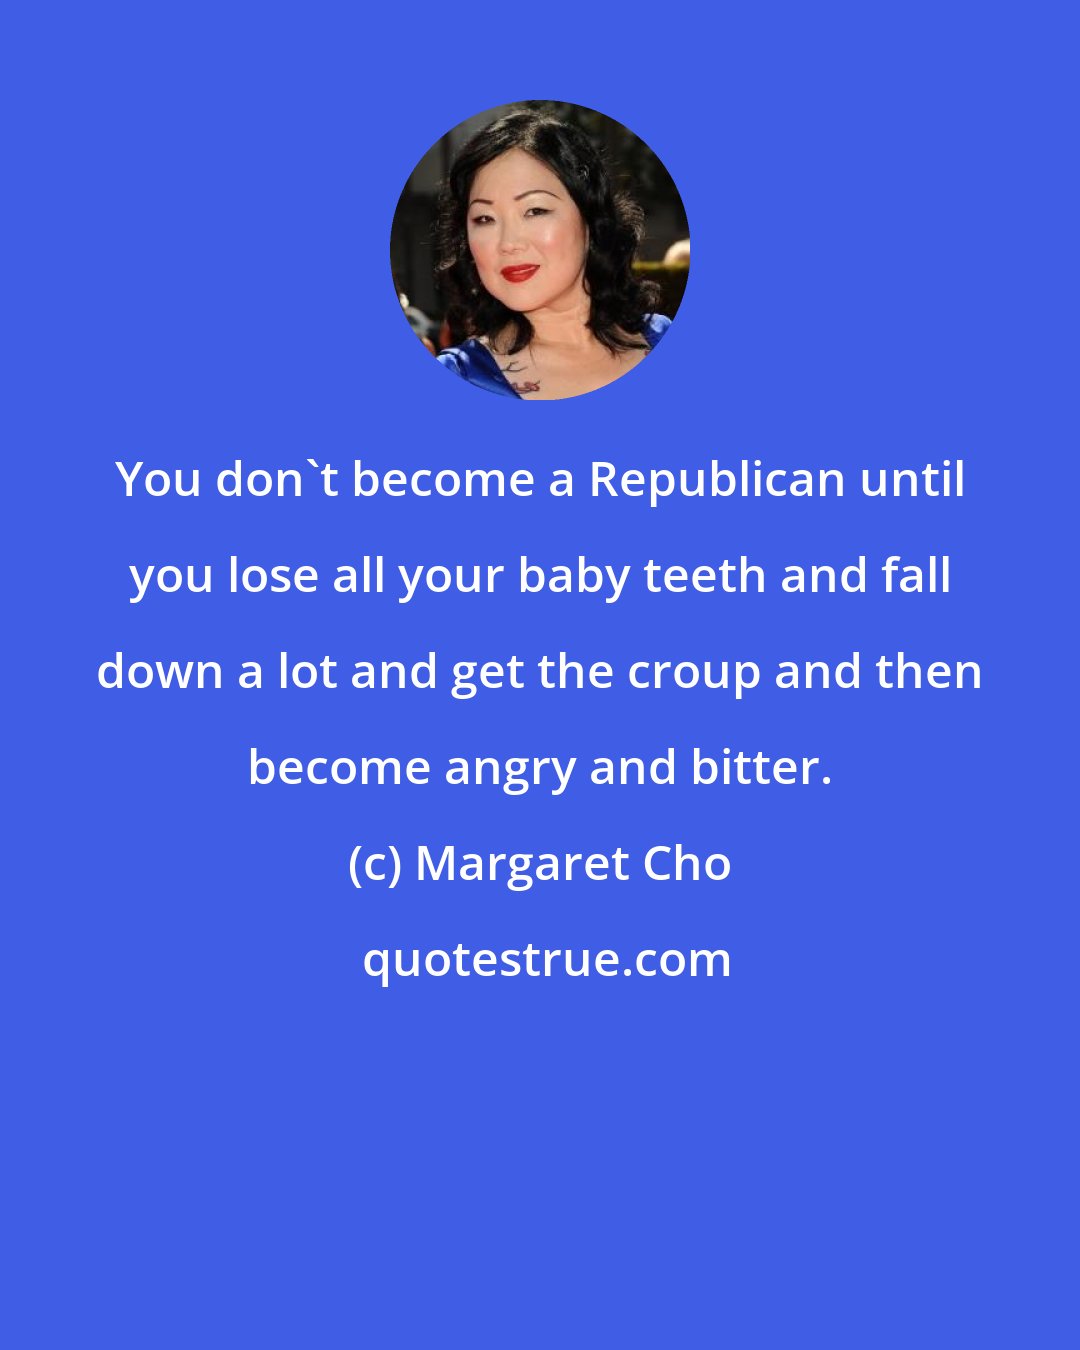 Margaret Cho: You don't become a Republican until you lose all your baby teeth and fall down a lot and get the croup and then become angry and bitter.